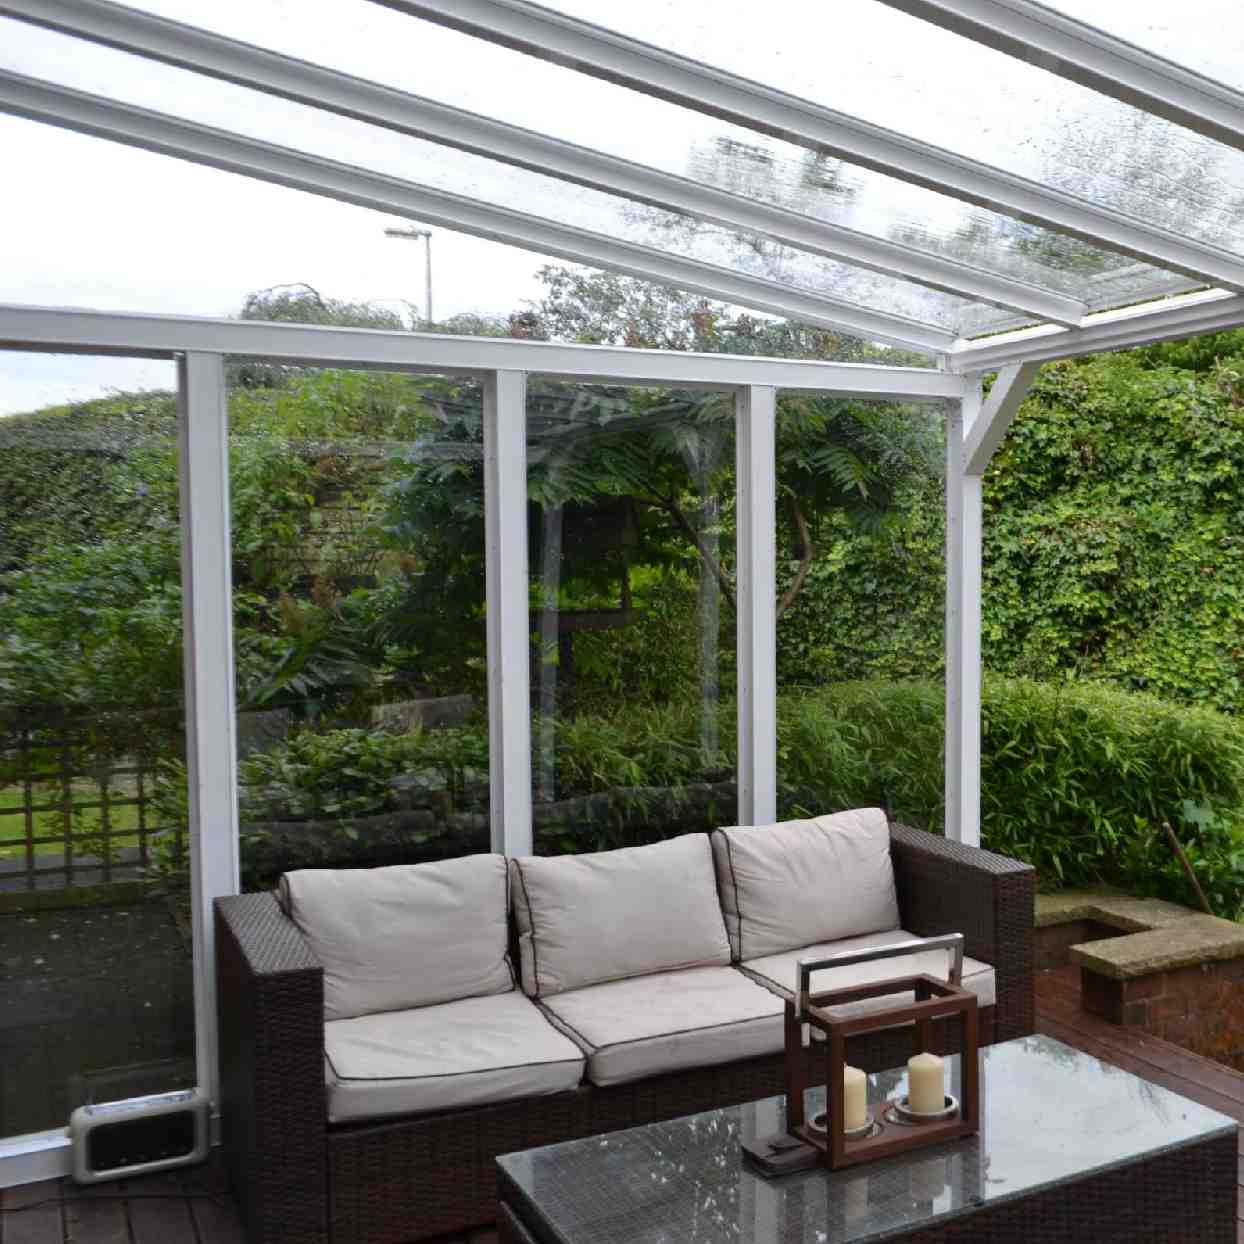 Buy Omega Verandah White with 16mm Polycarbonate Glazing - 4.2m (W) x 2.5m (P), (3) Supporting Posts online today